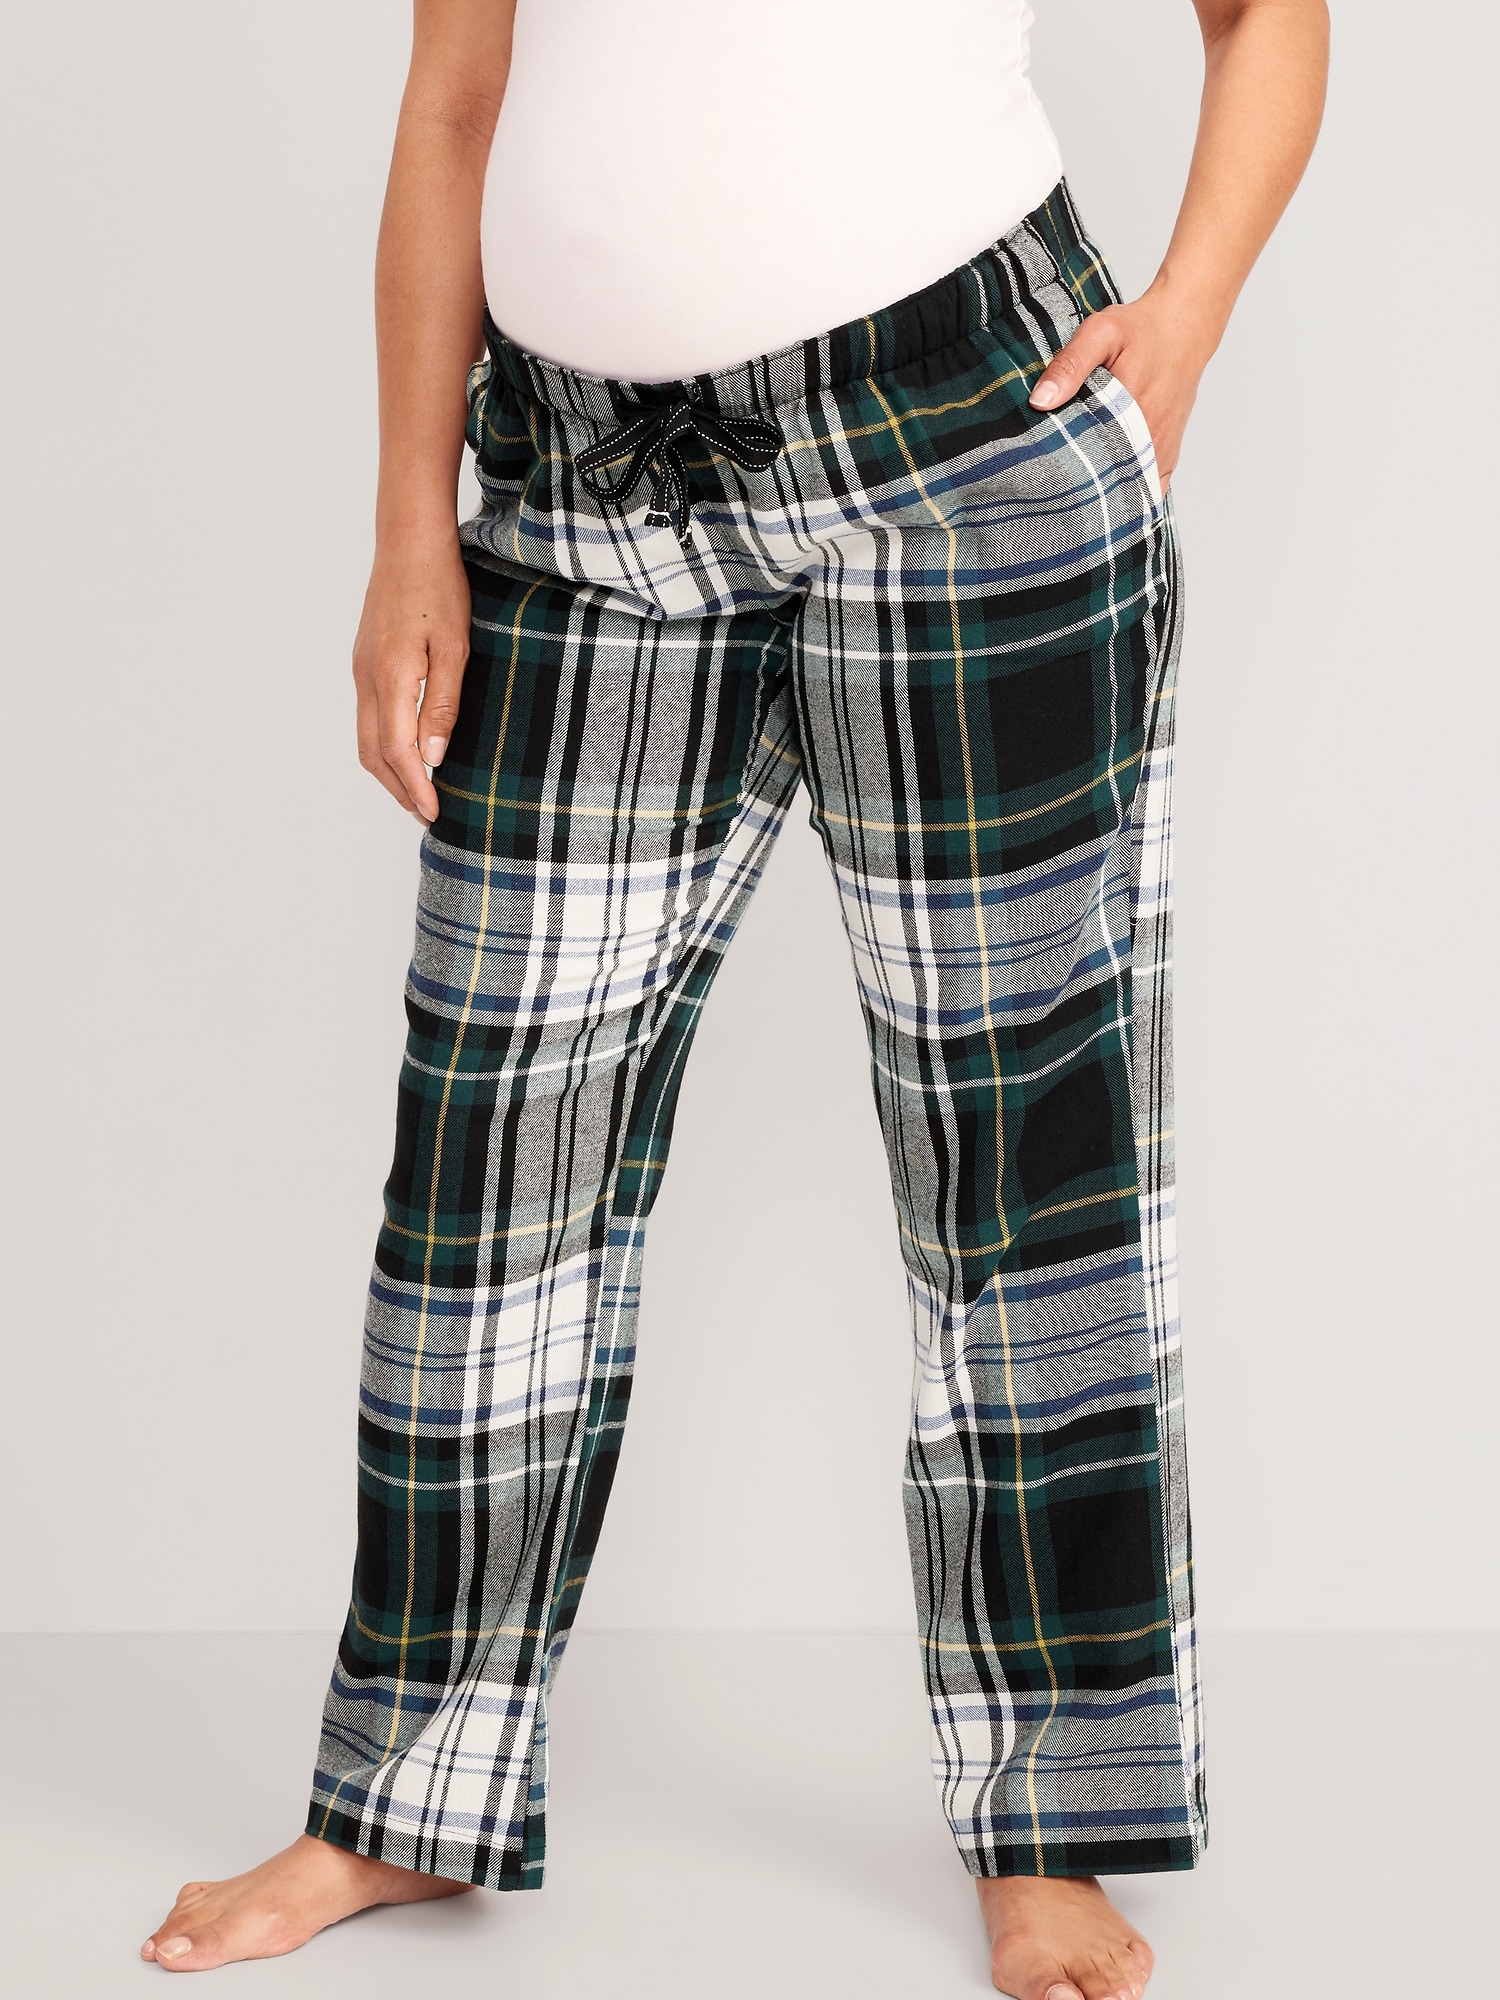 Old Navy 100% Cotton Pajama Pants for Women